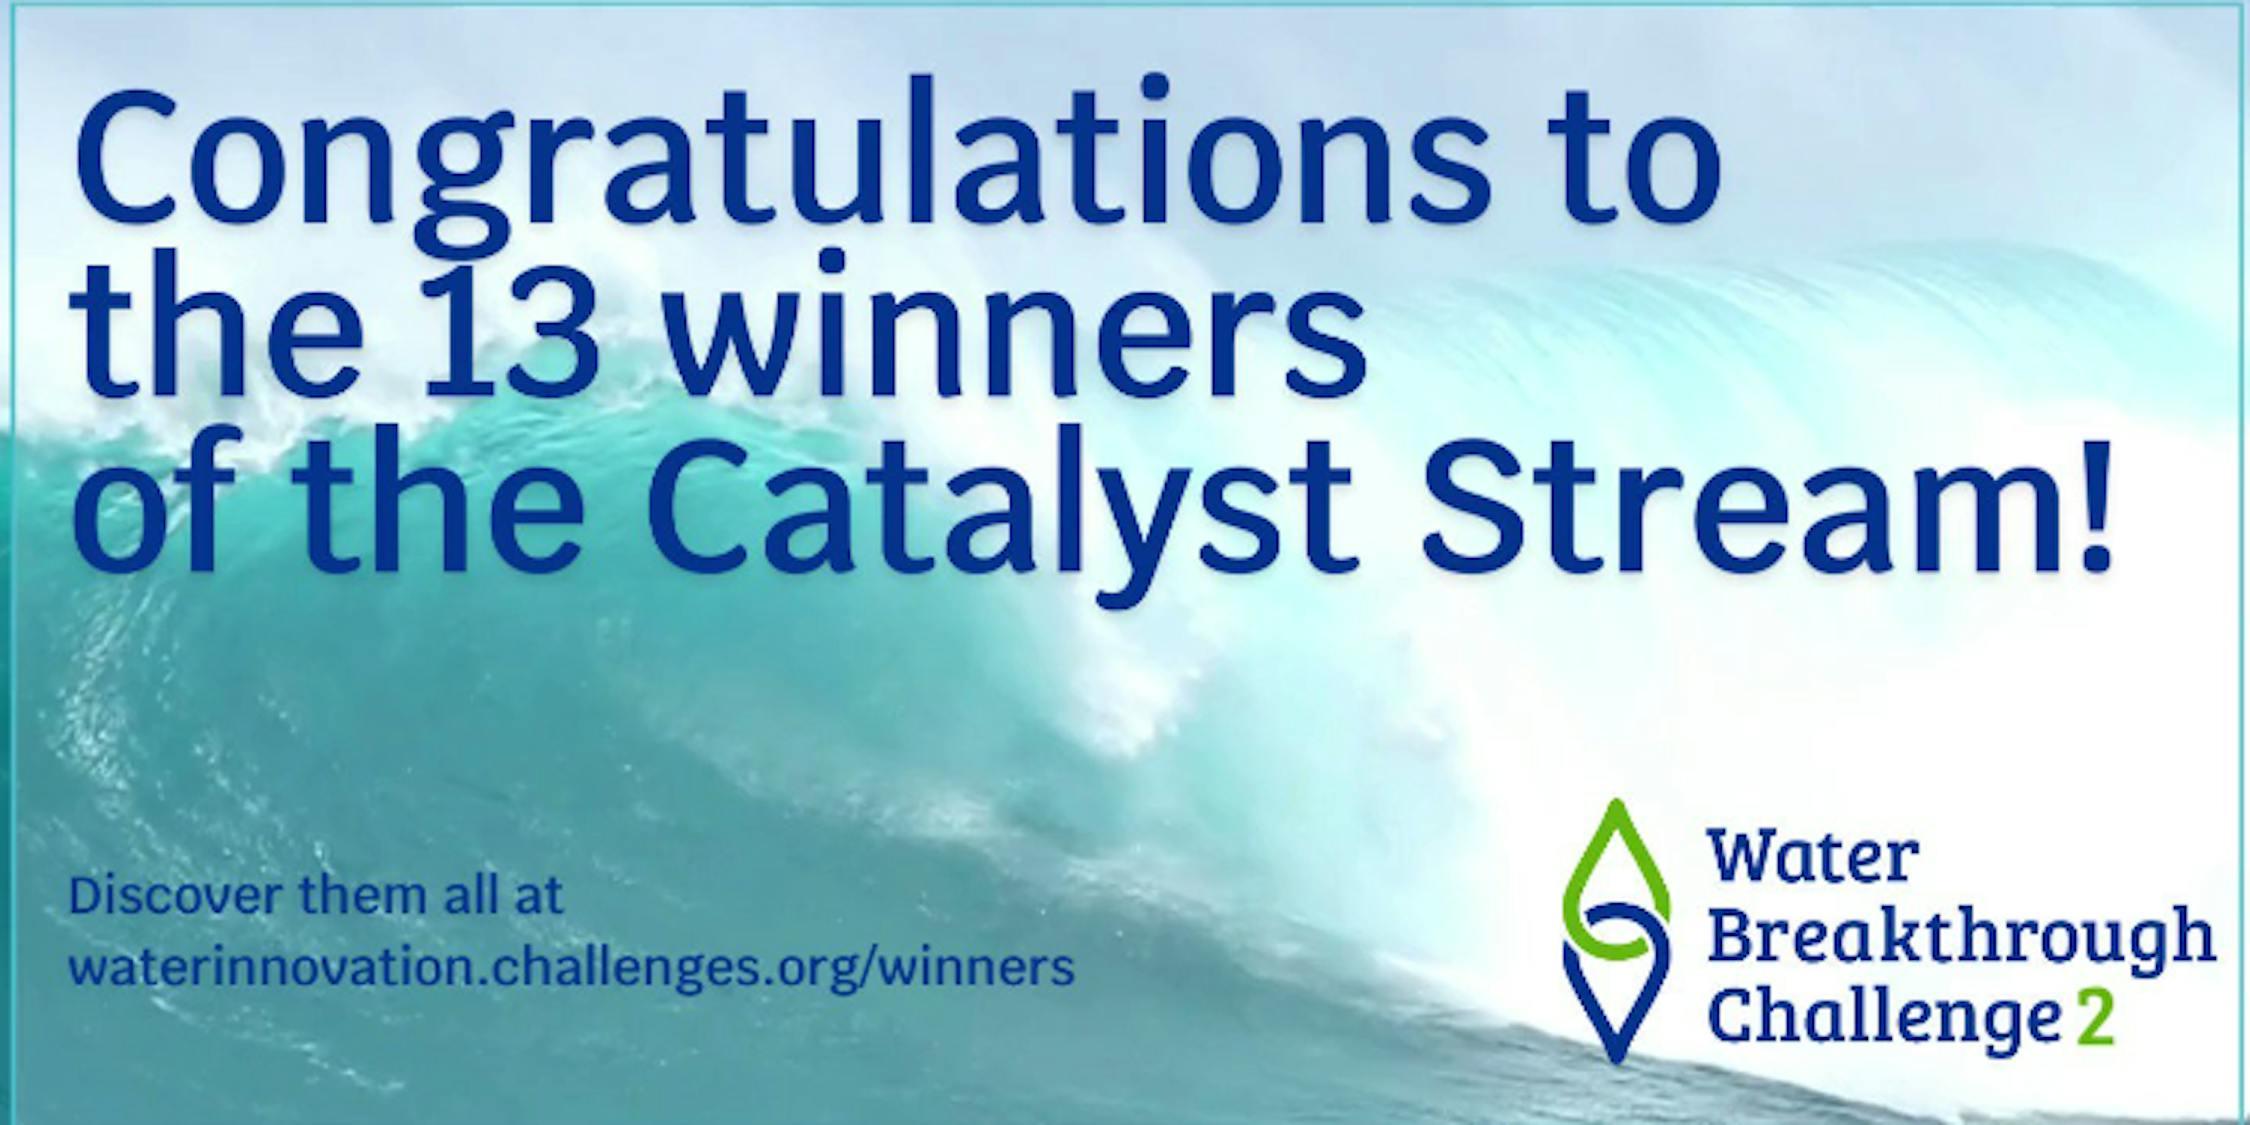 Ofwat poster congratulating winners of the catalyst stream